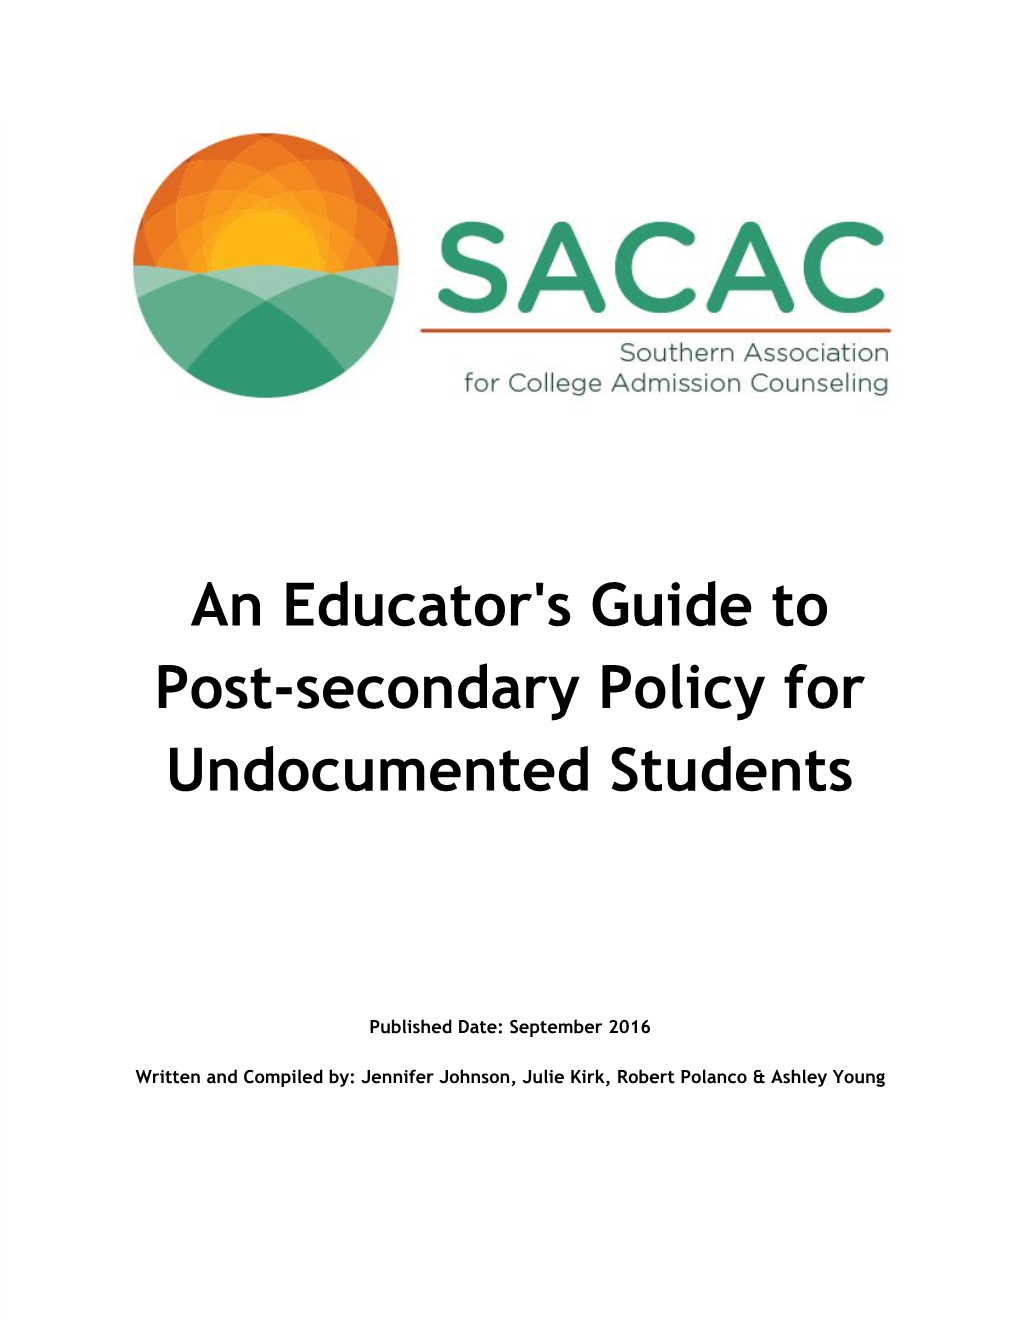 Secondary Policy for Undocumented Students